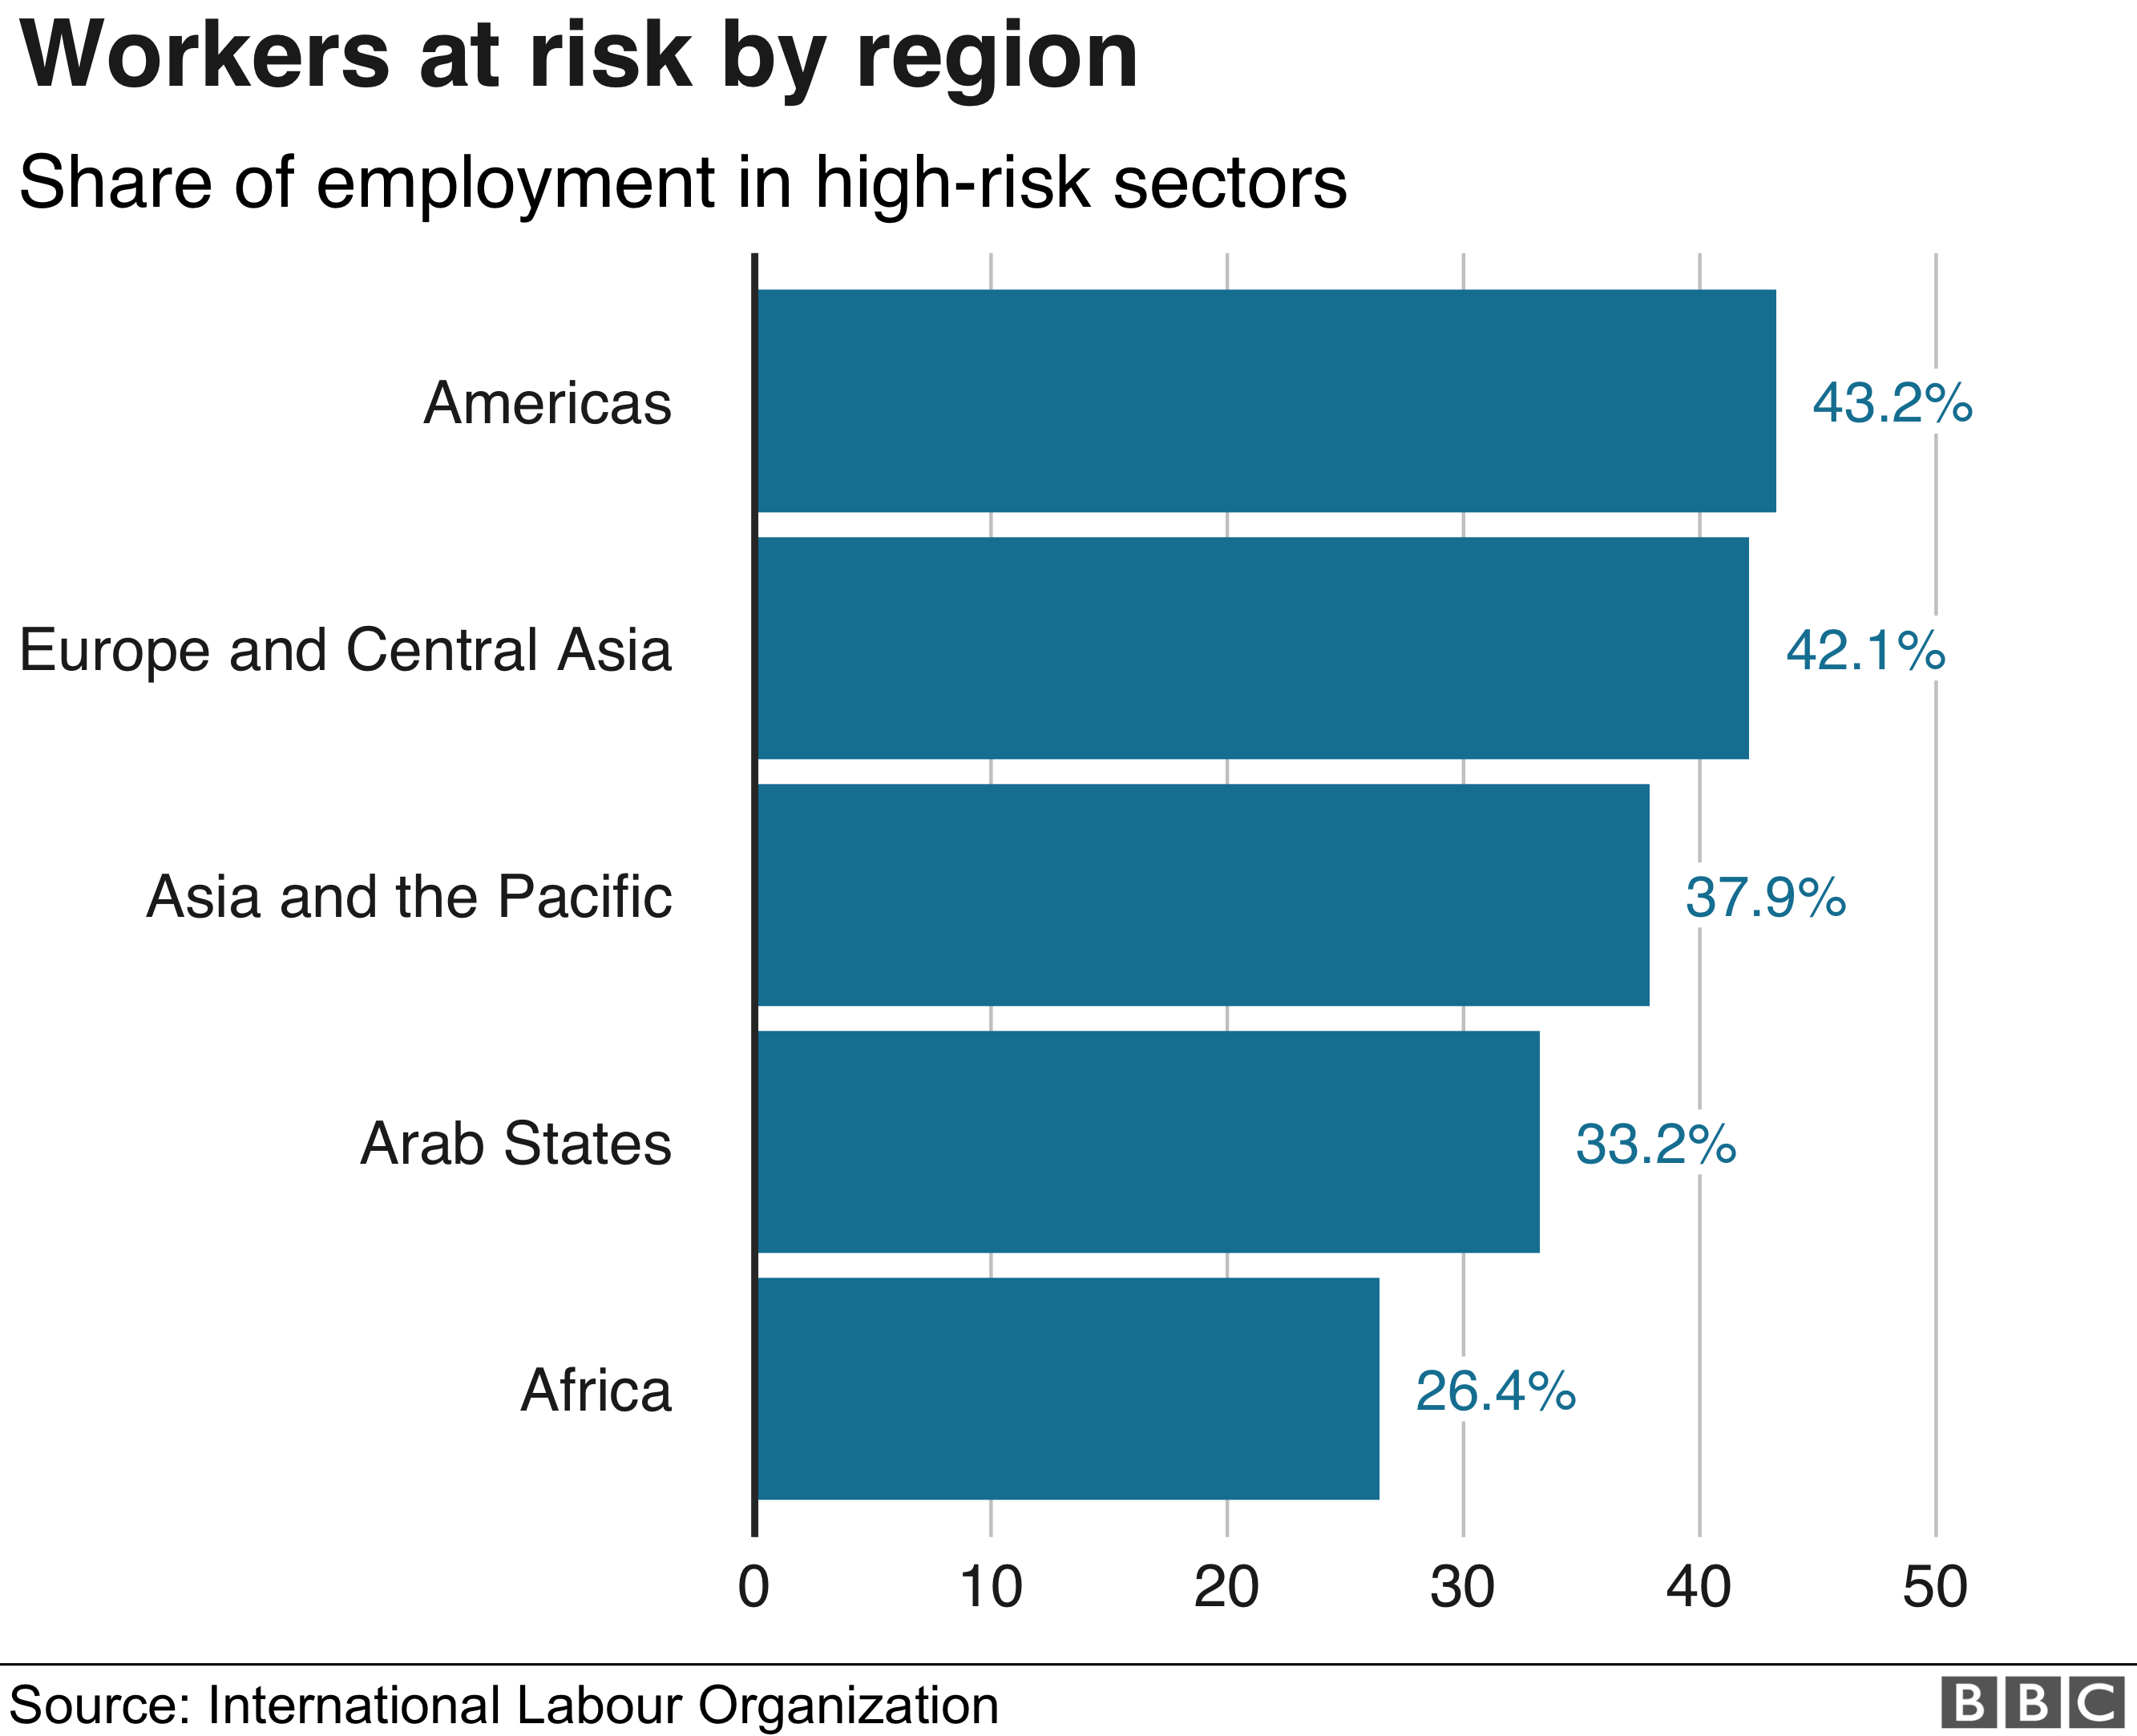 Workers at risk by region bar chart